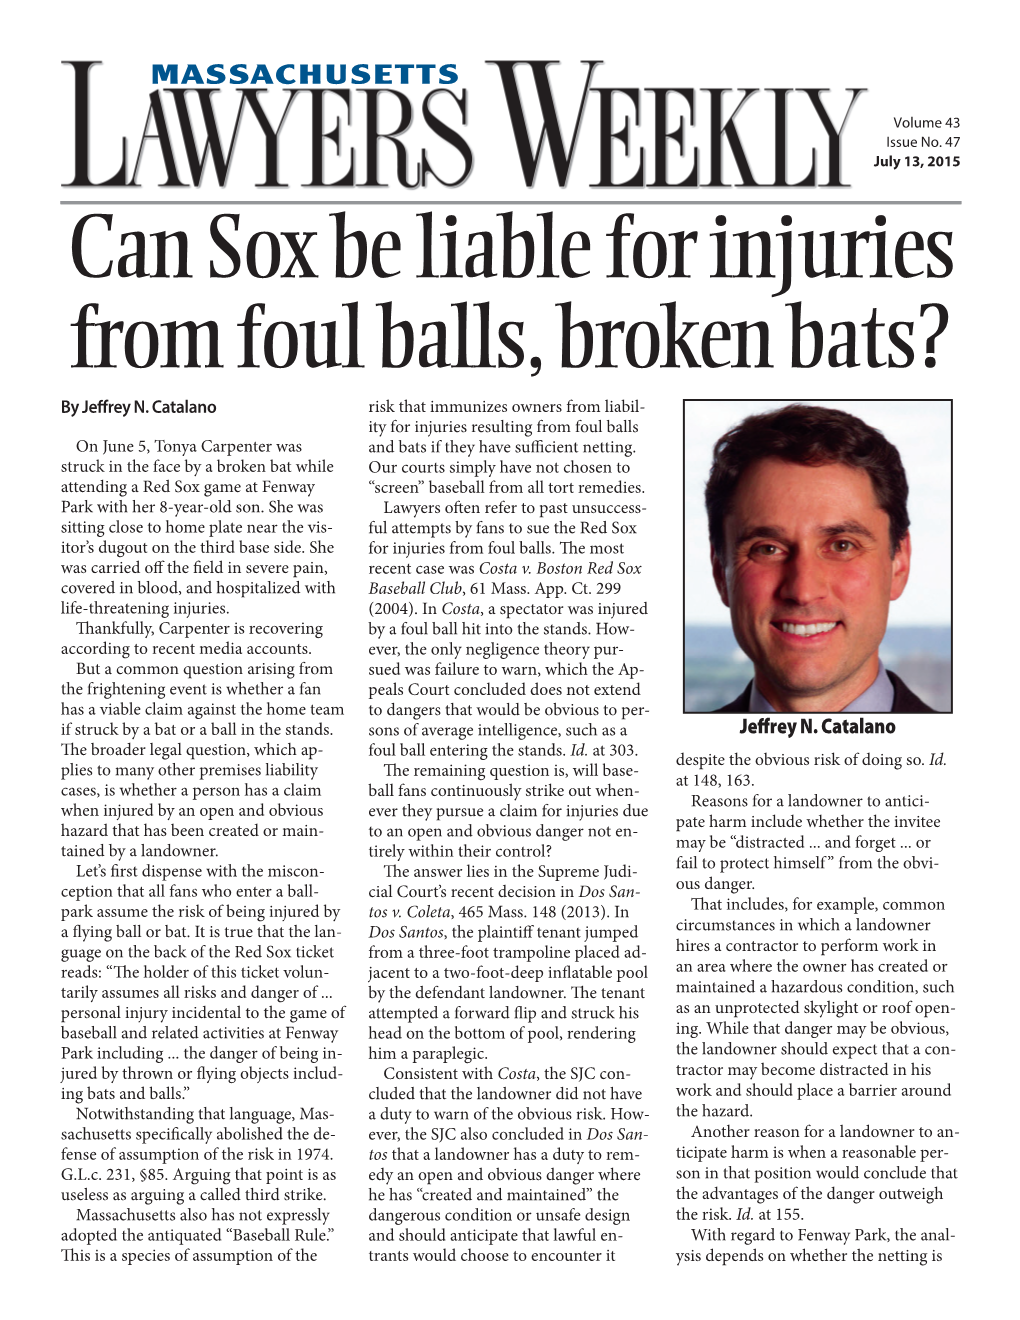 Can Sox Be Liable for Injuries from Foul Balls, Broken Bats? by Jeffrey N